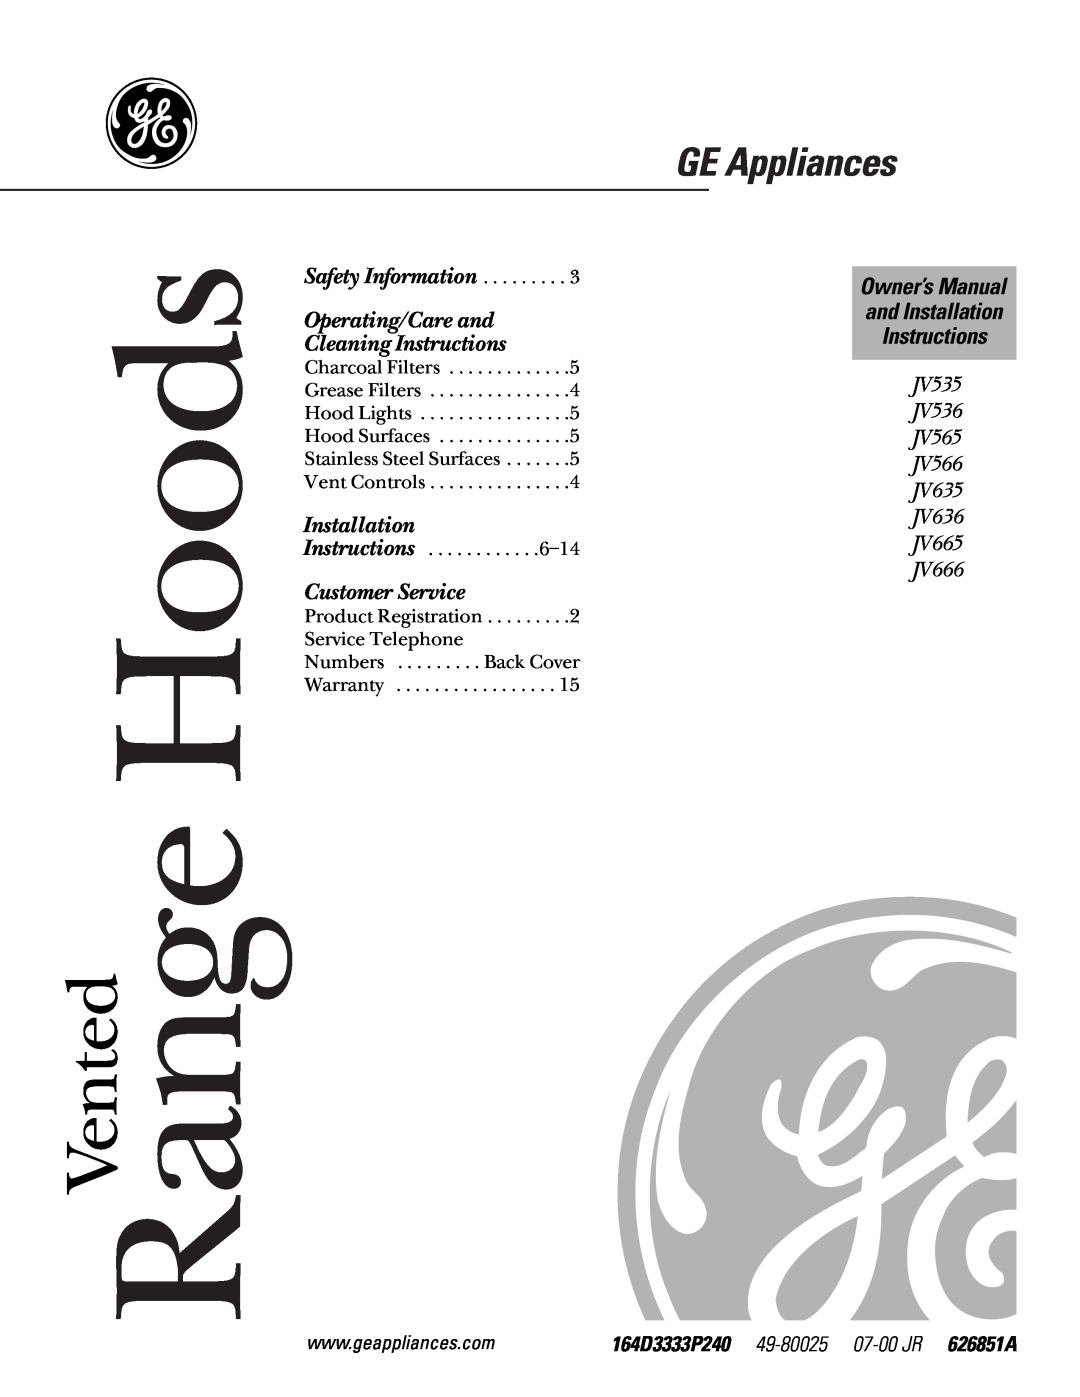 GE JV636 owner manual Range Hoods, GE Appliances, Vented, Safety Information, Operating/Care and, Cleaning Instructions 